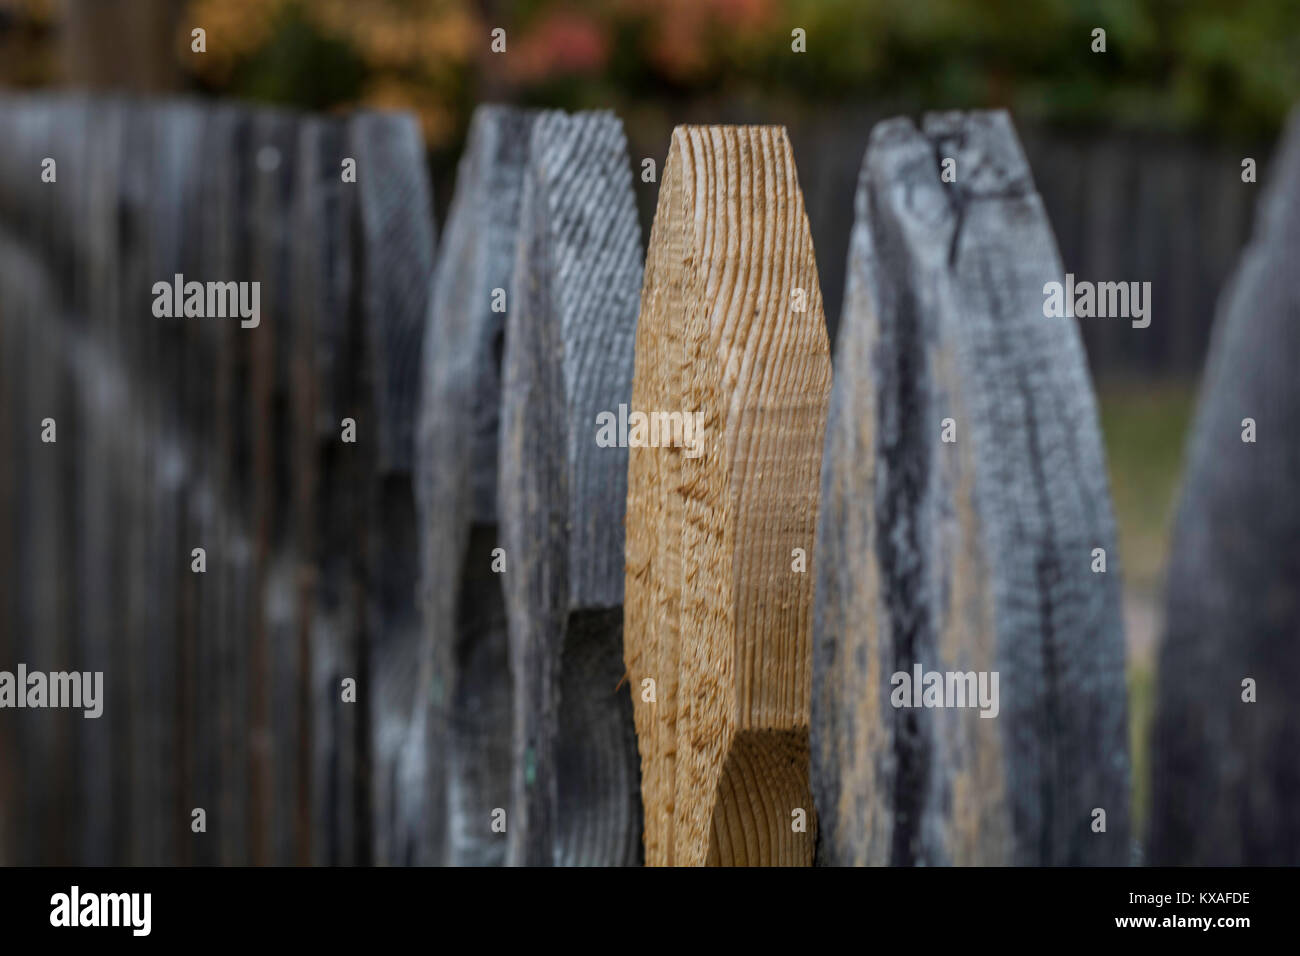 A wooden fence with one unique piece of wood. The one piece of wood is paler in color, and newer, than the other darker, gray wooden sections. Stock Photo